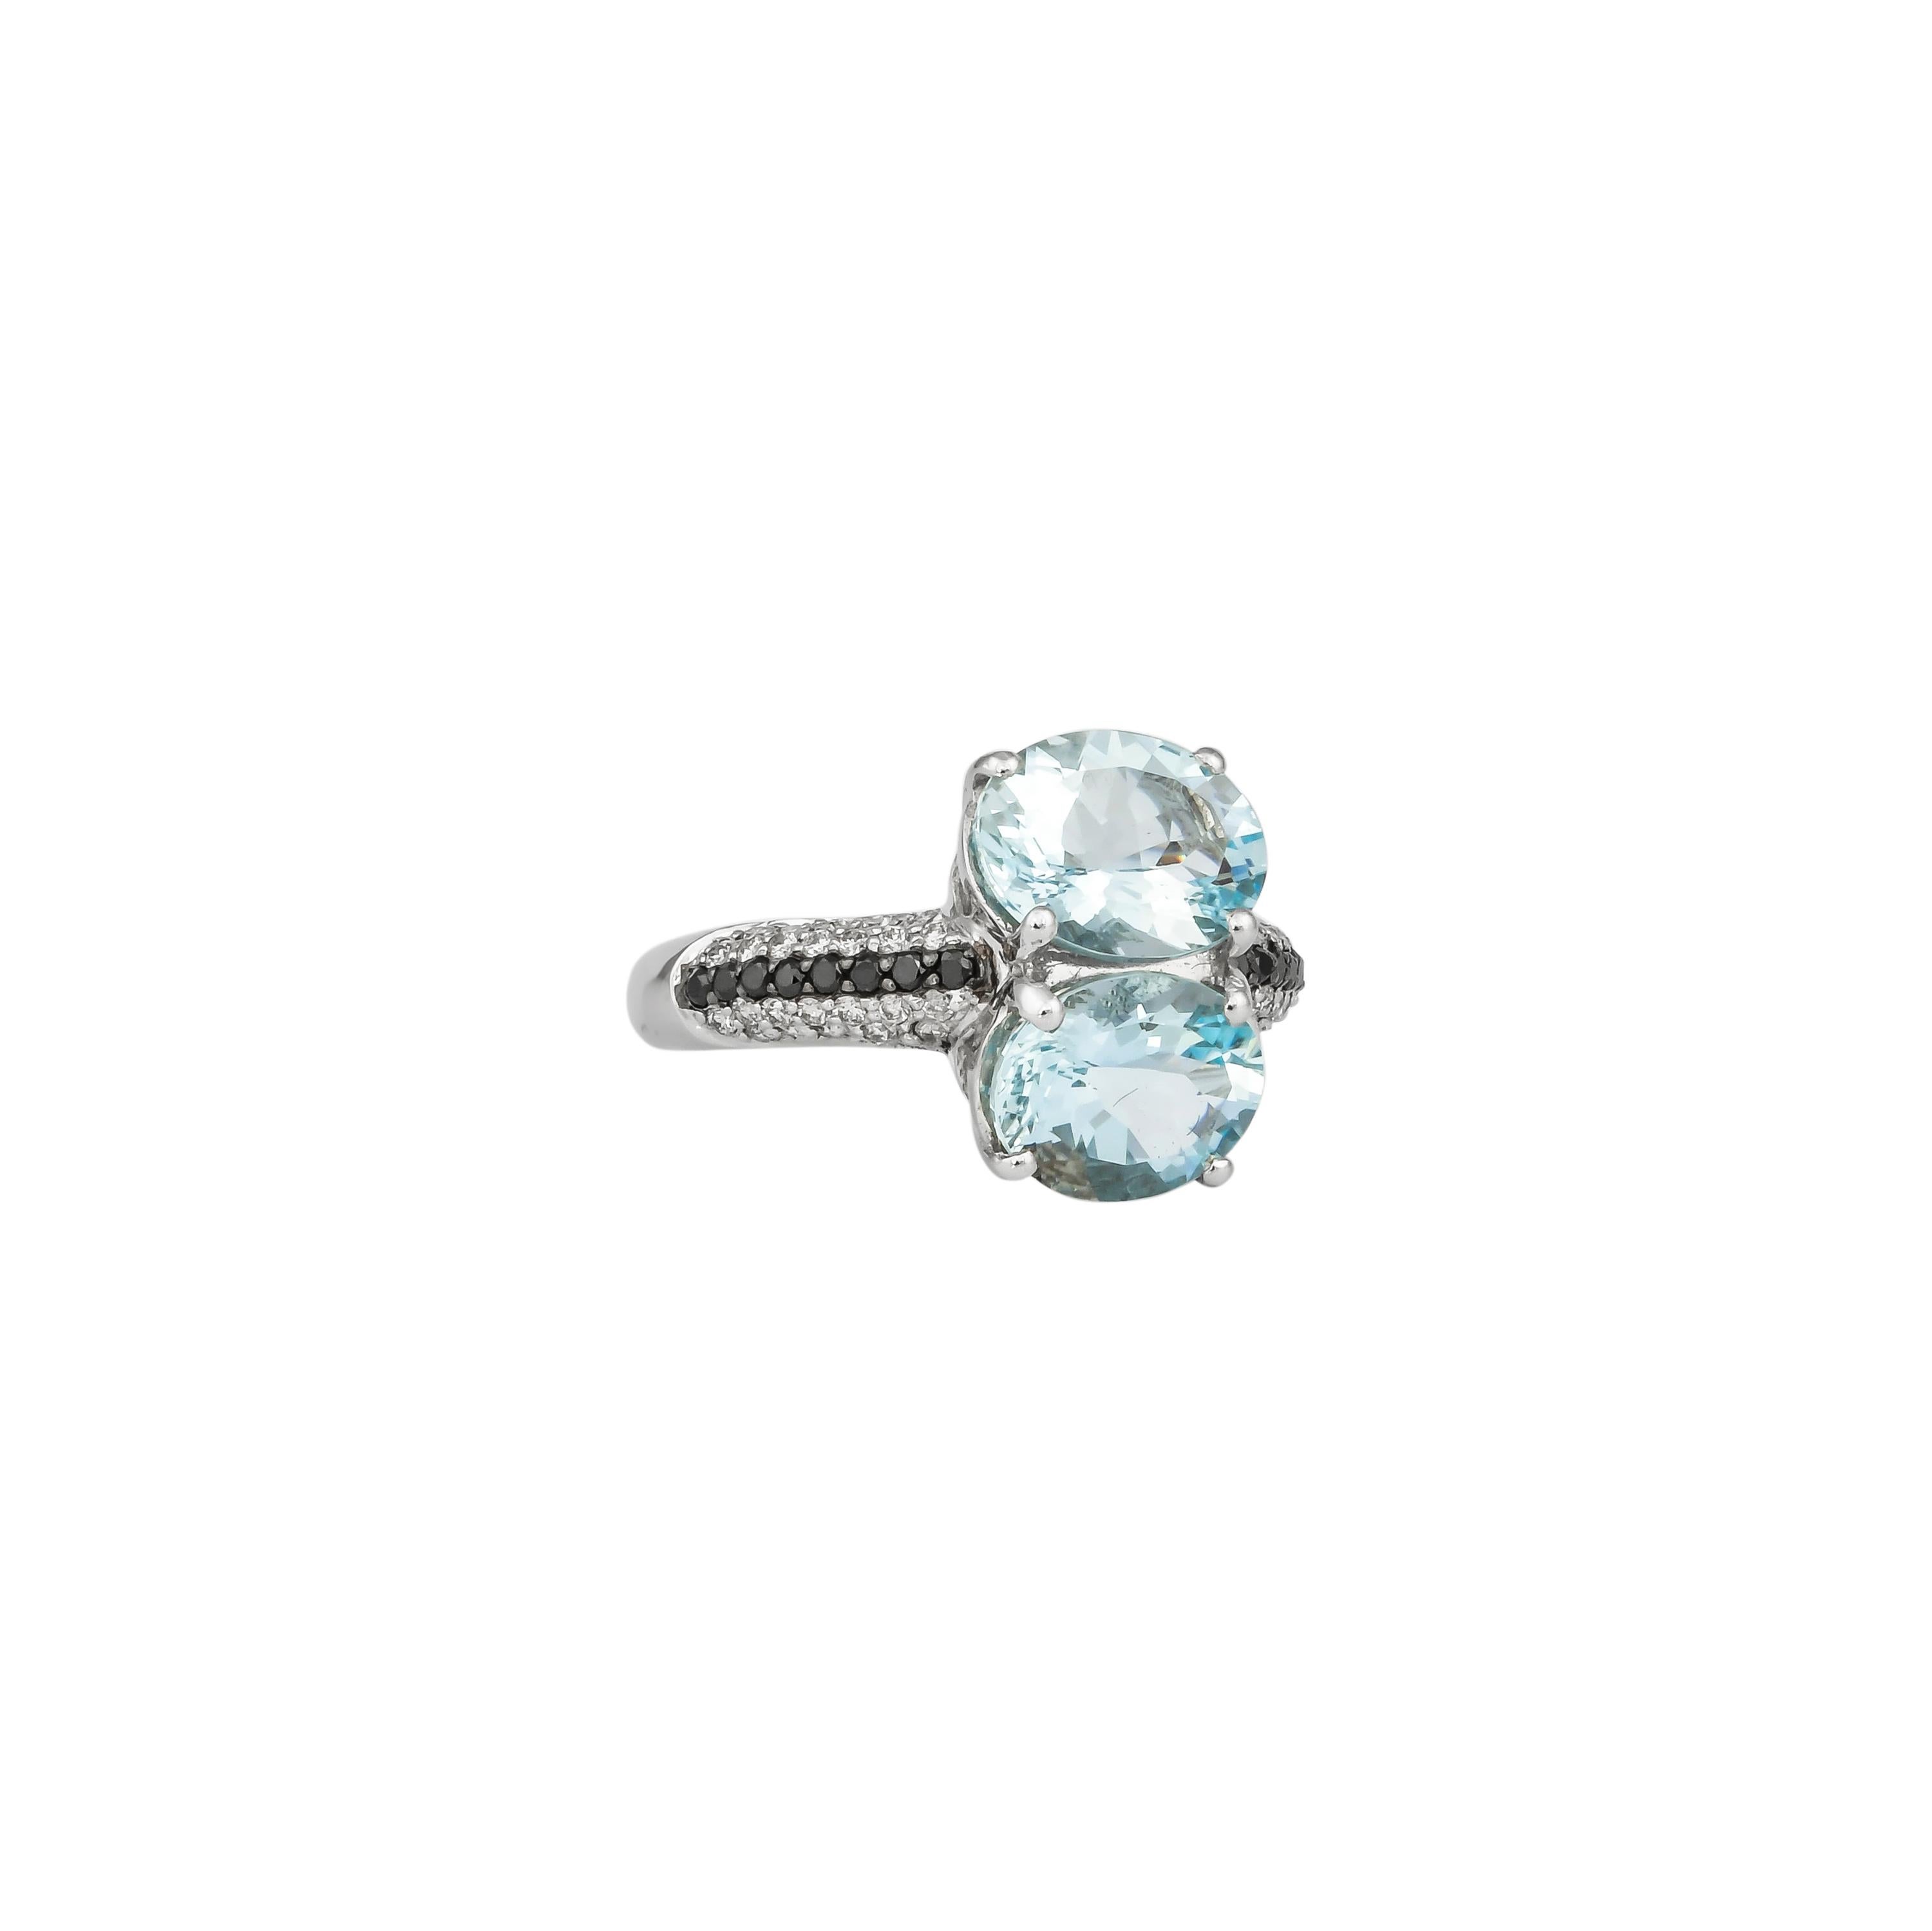 This collection features an array of aquamarines with an icy blue hue that is as cool as it gets! Accented with diamonds these rings are made in white and present a classic yet elegant look. 

Classic aquamarine ring in 14K white gold with diamonds.